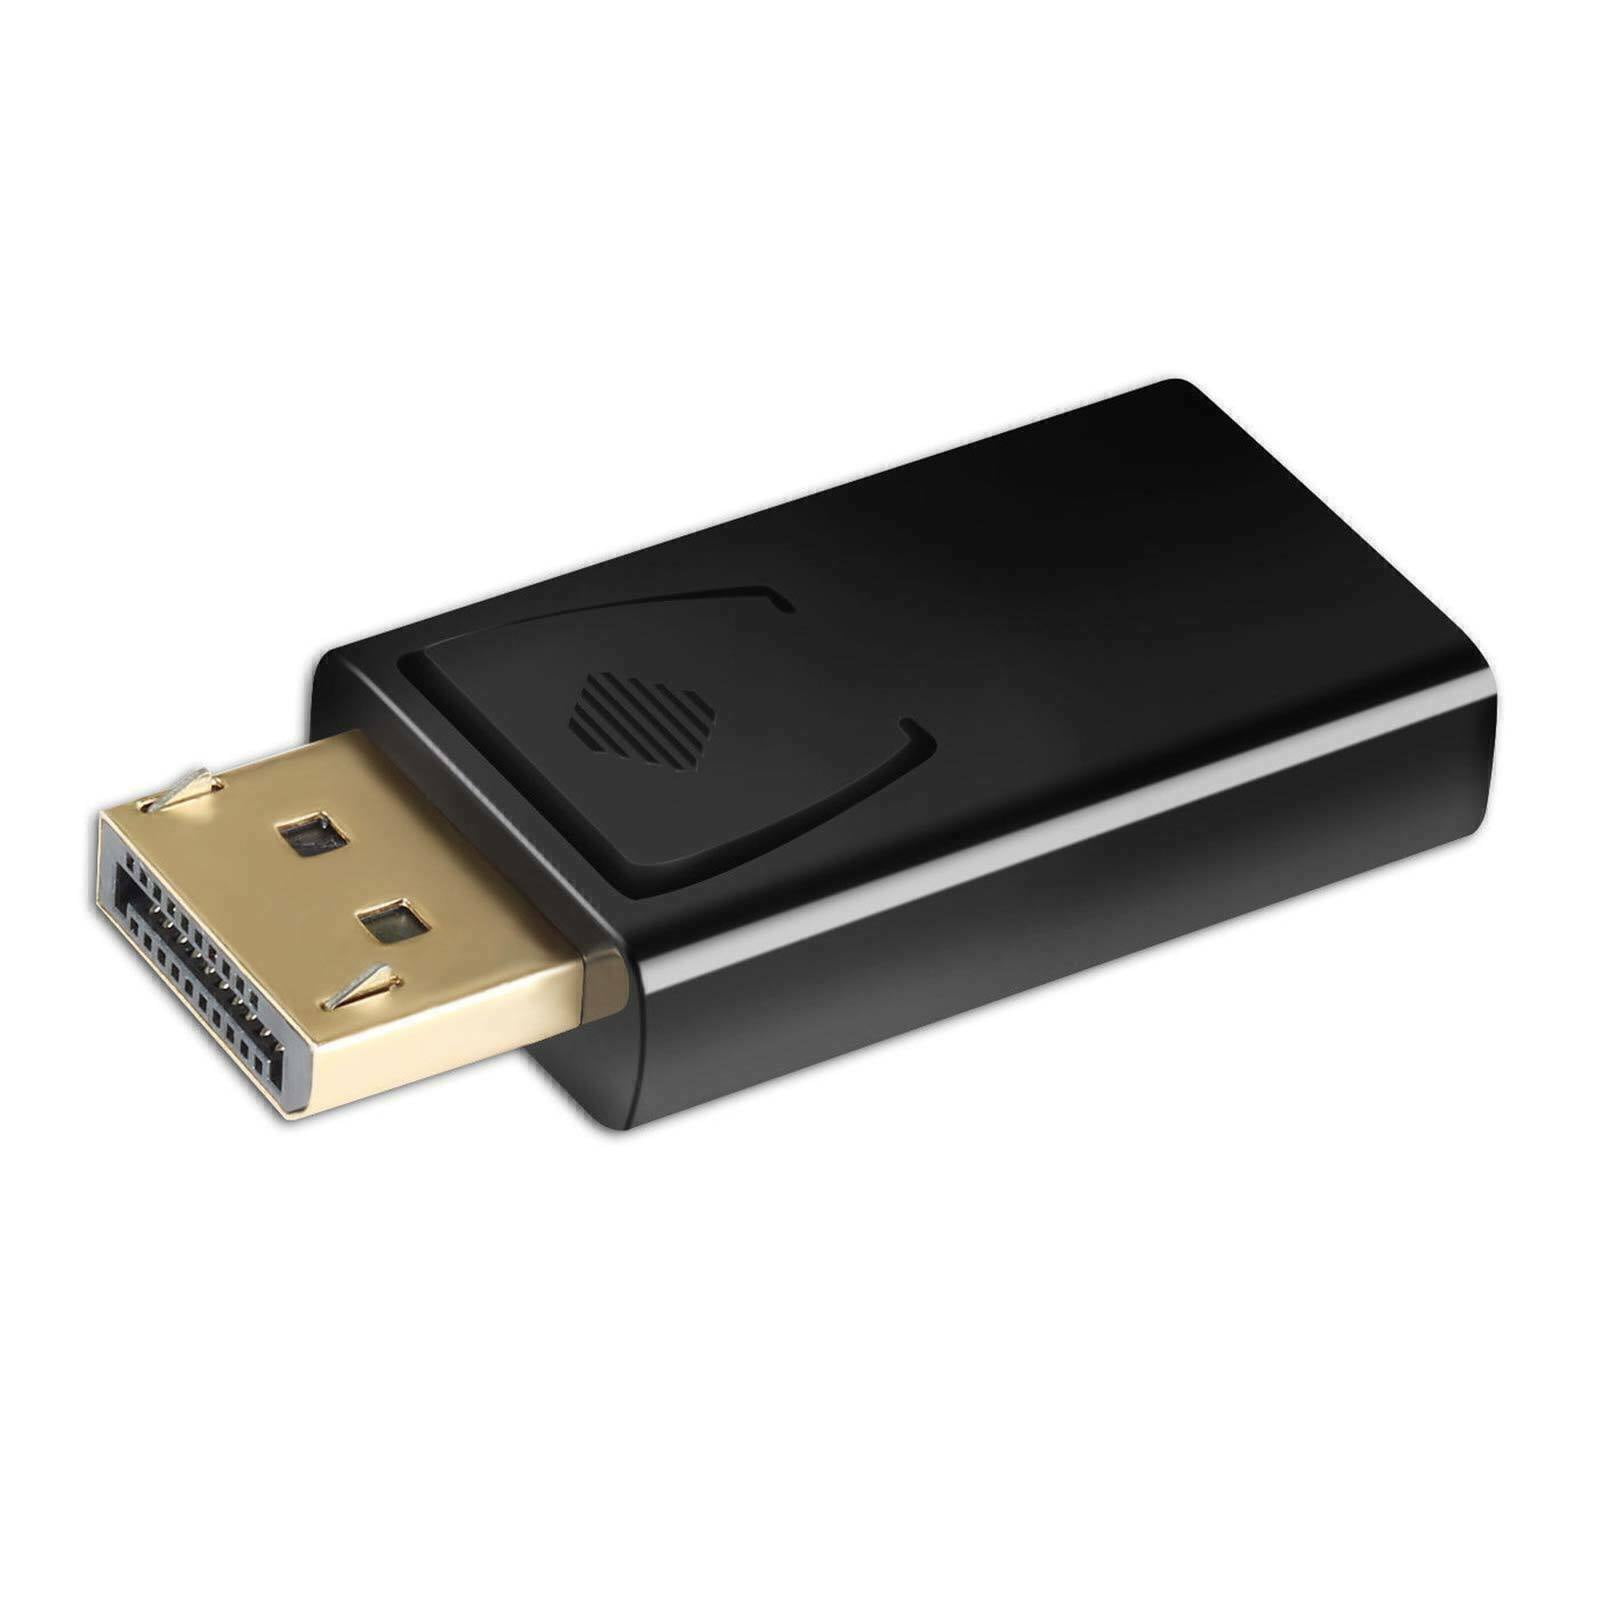 Display Port S SIENOC Displayport TO HDMI Adapter Dp Male TO HDMI Female Converter DP TO HDMI 17CM